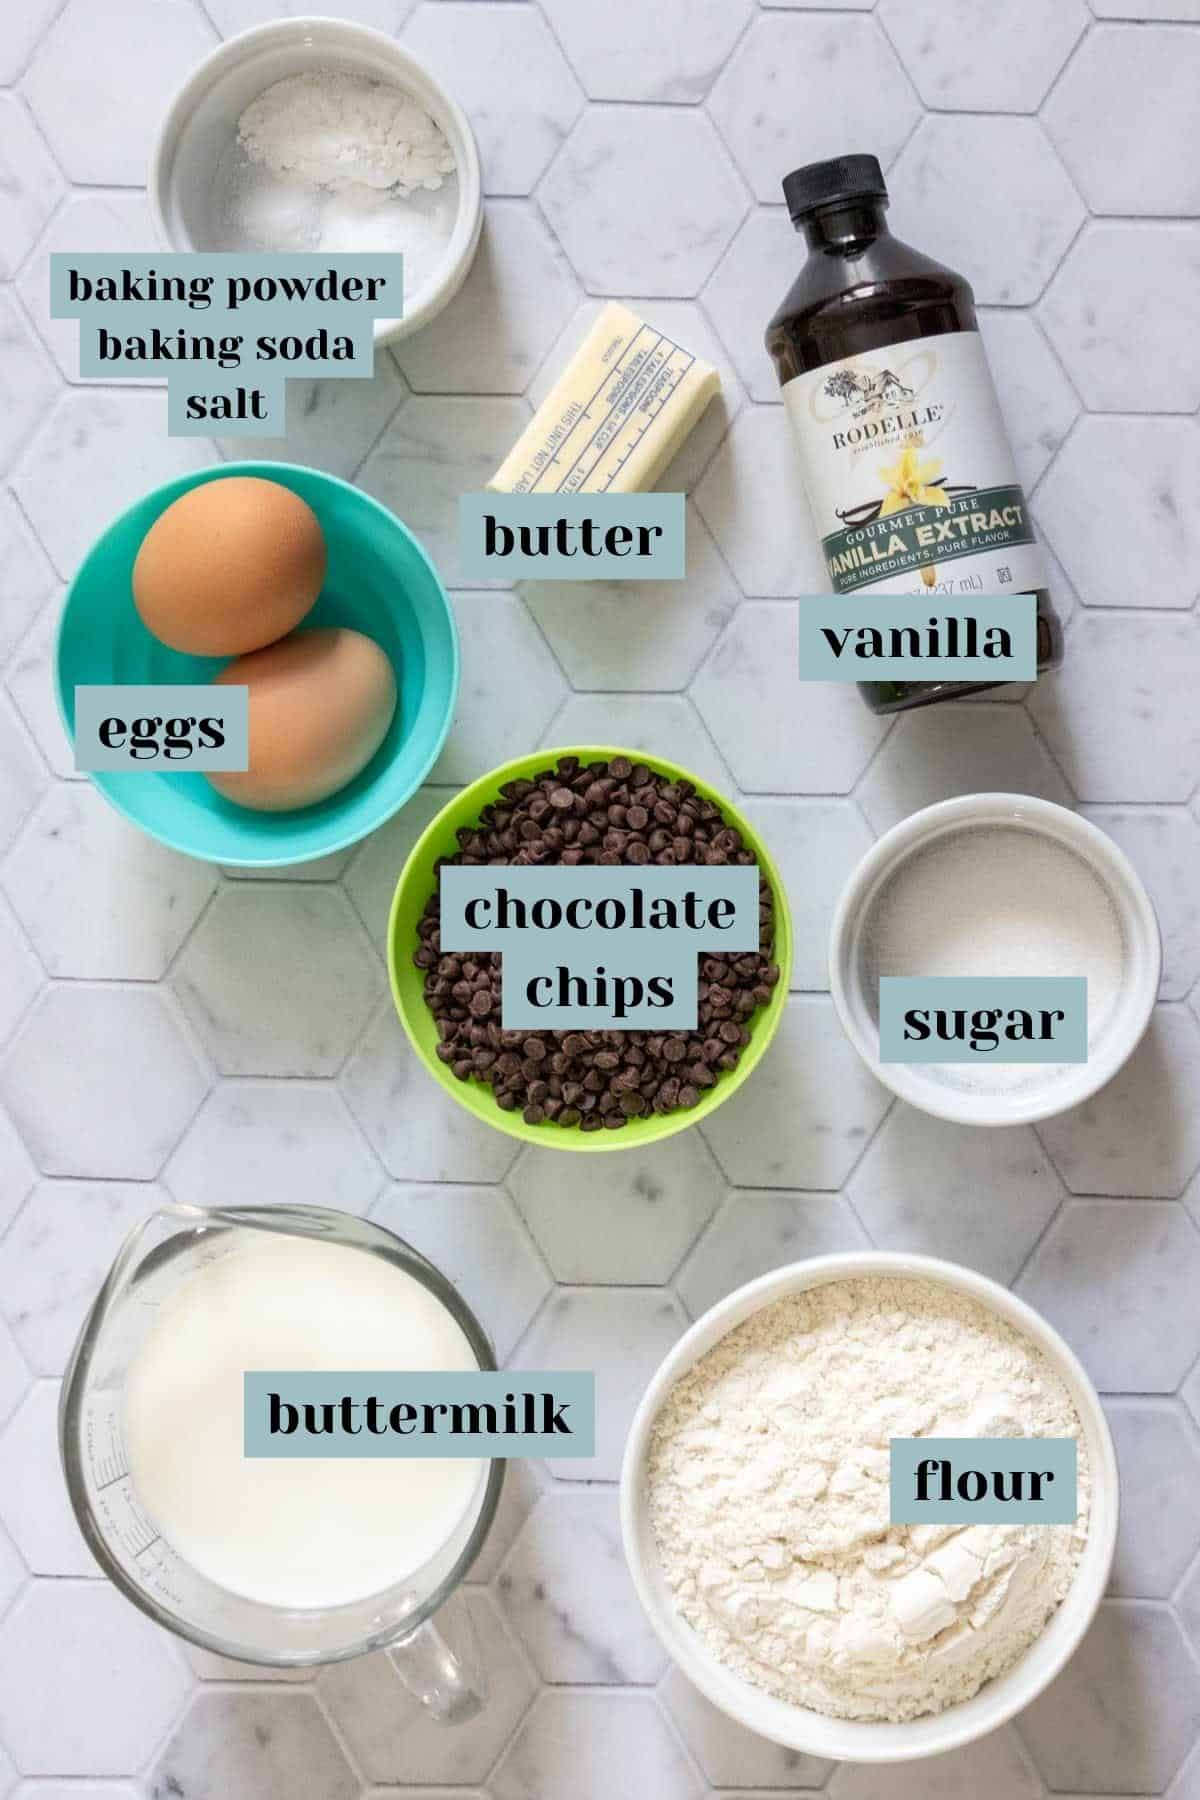 Ingredients for chocolate chip waffles and pancakes on a tile surface with labels.